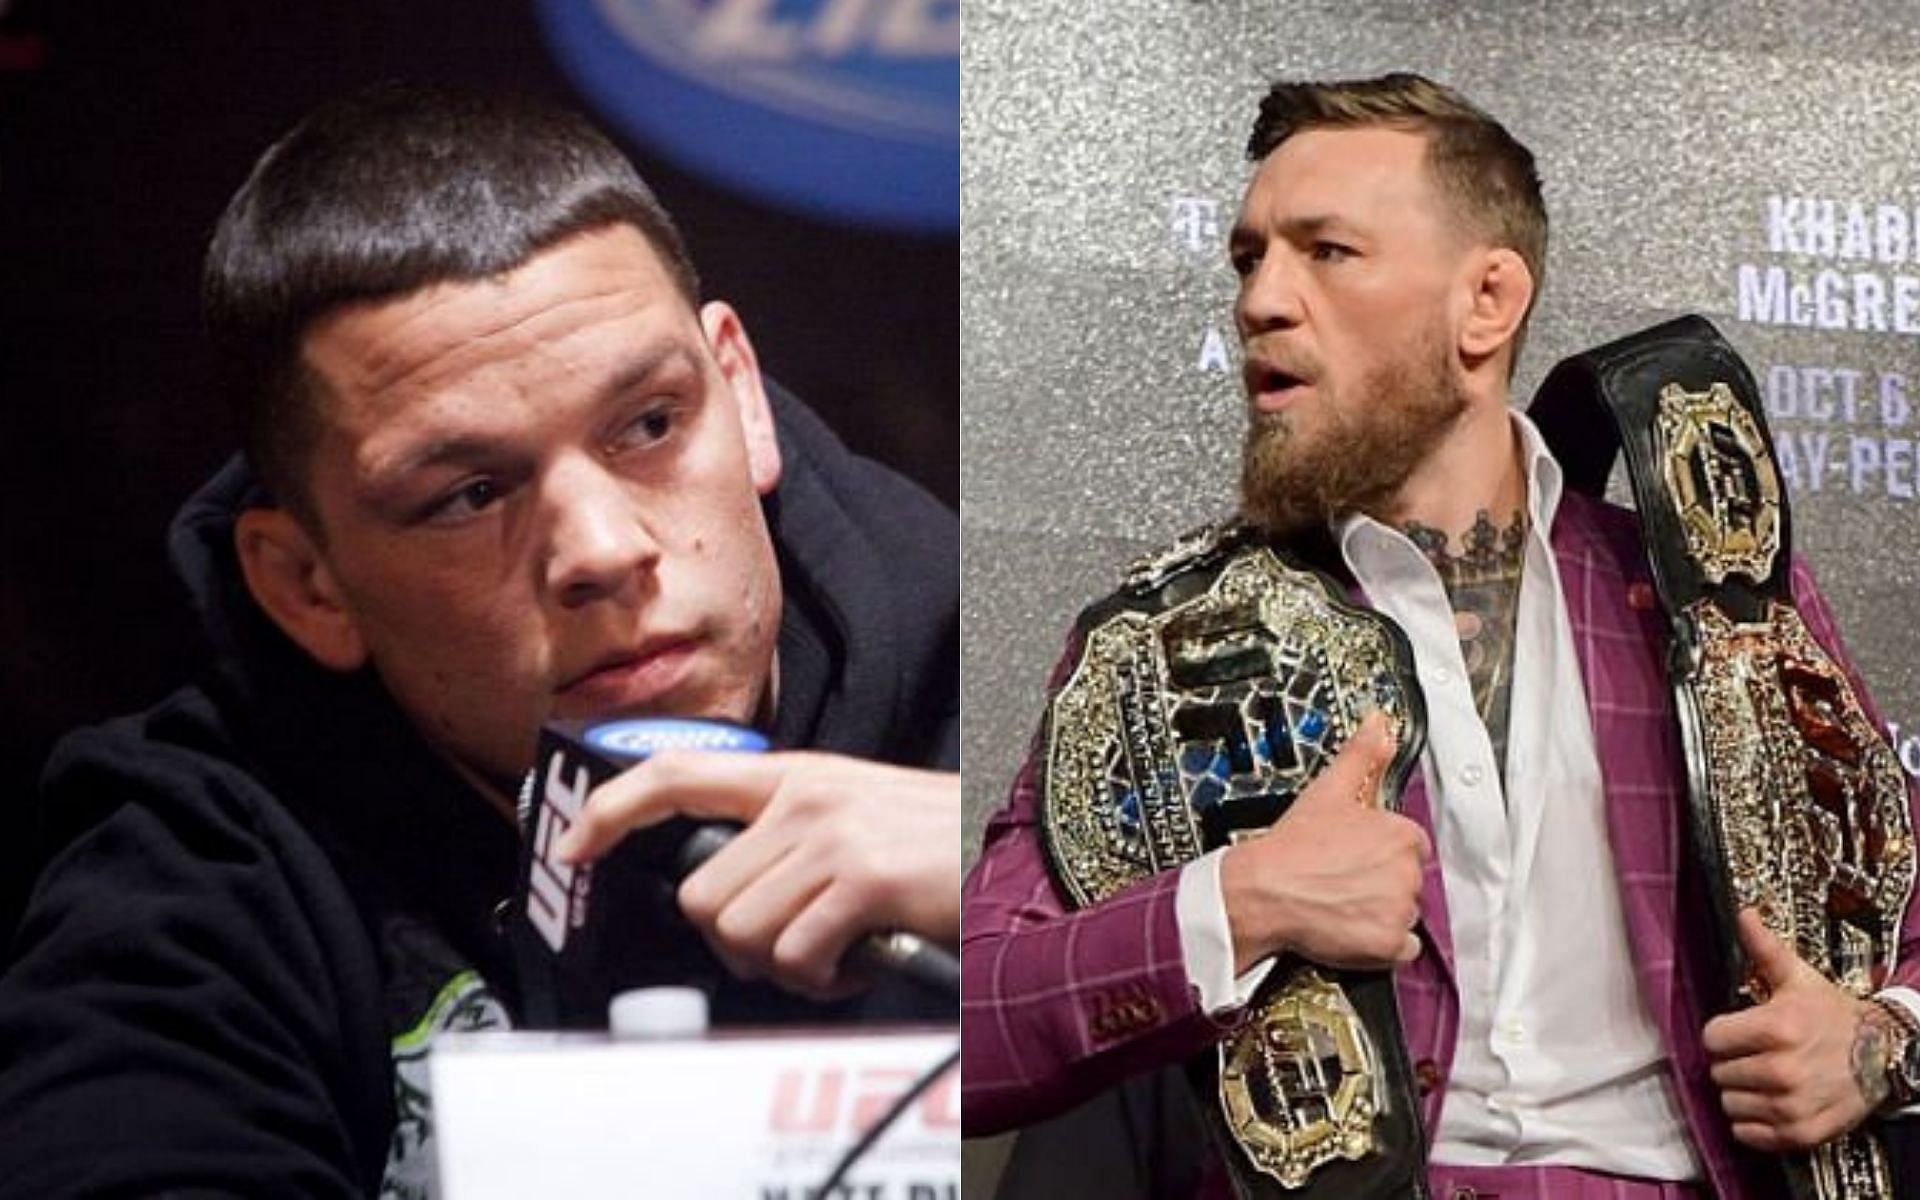 Nate Diaz (left) and Conor McGregor (right)